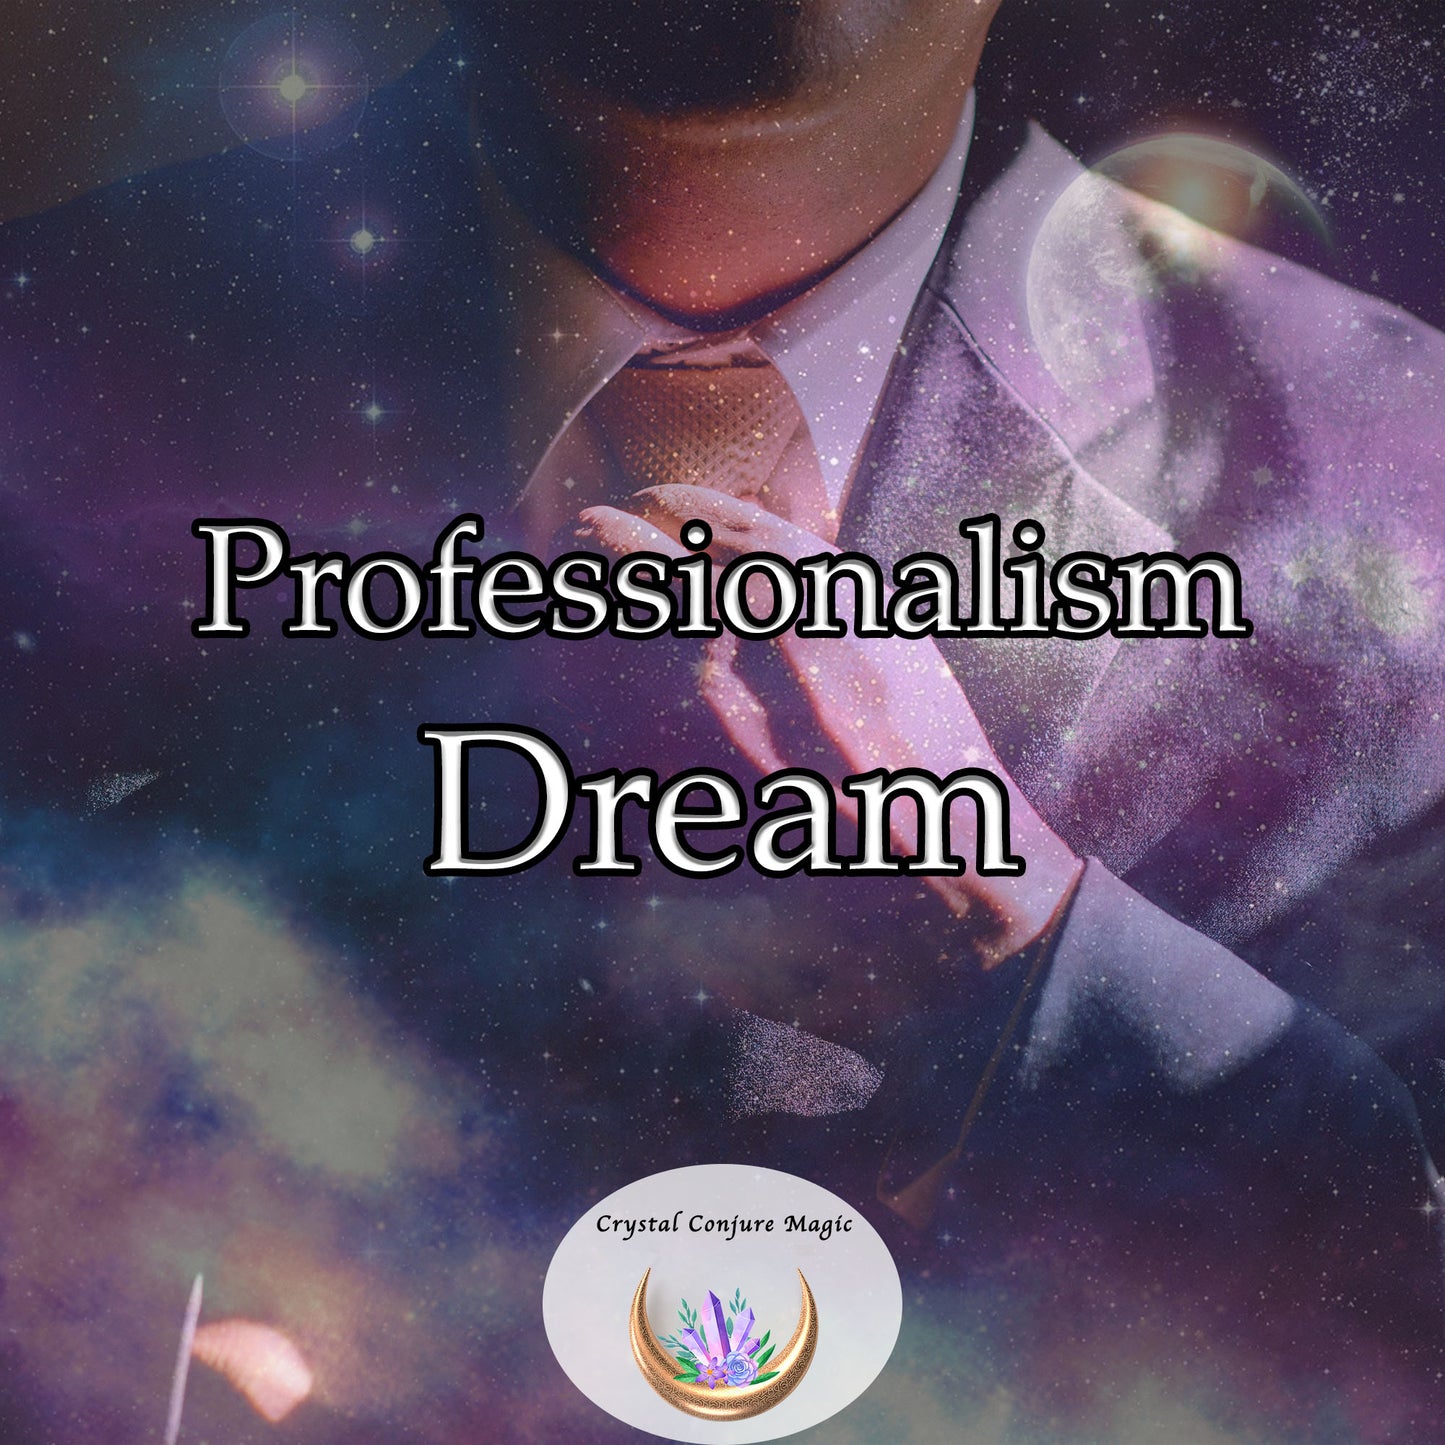 Professionalism Dream - bring more poise, confidence, and polish to your professional interactions and work